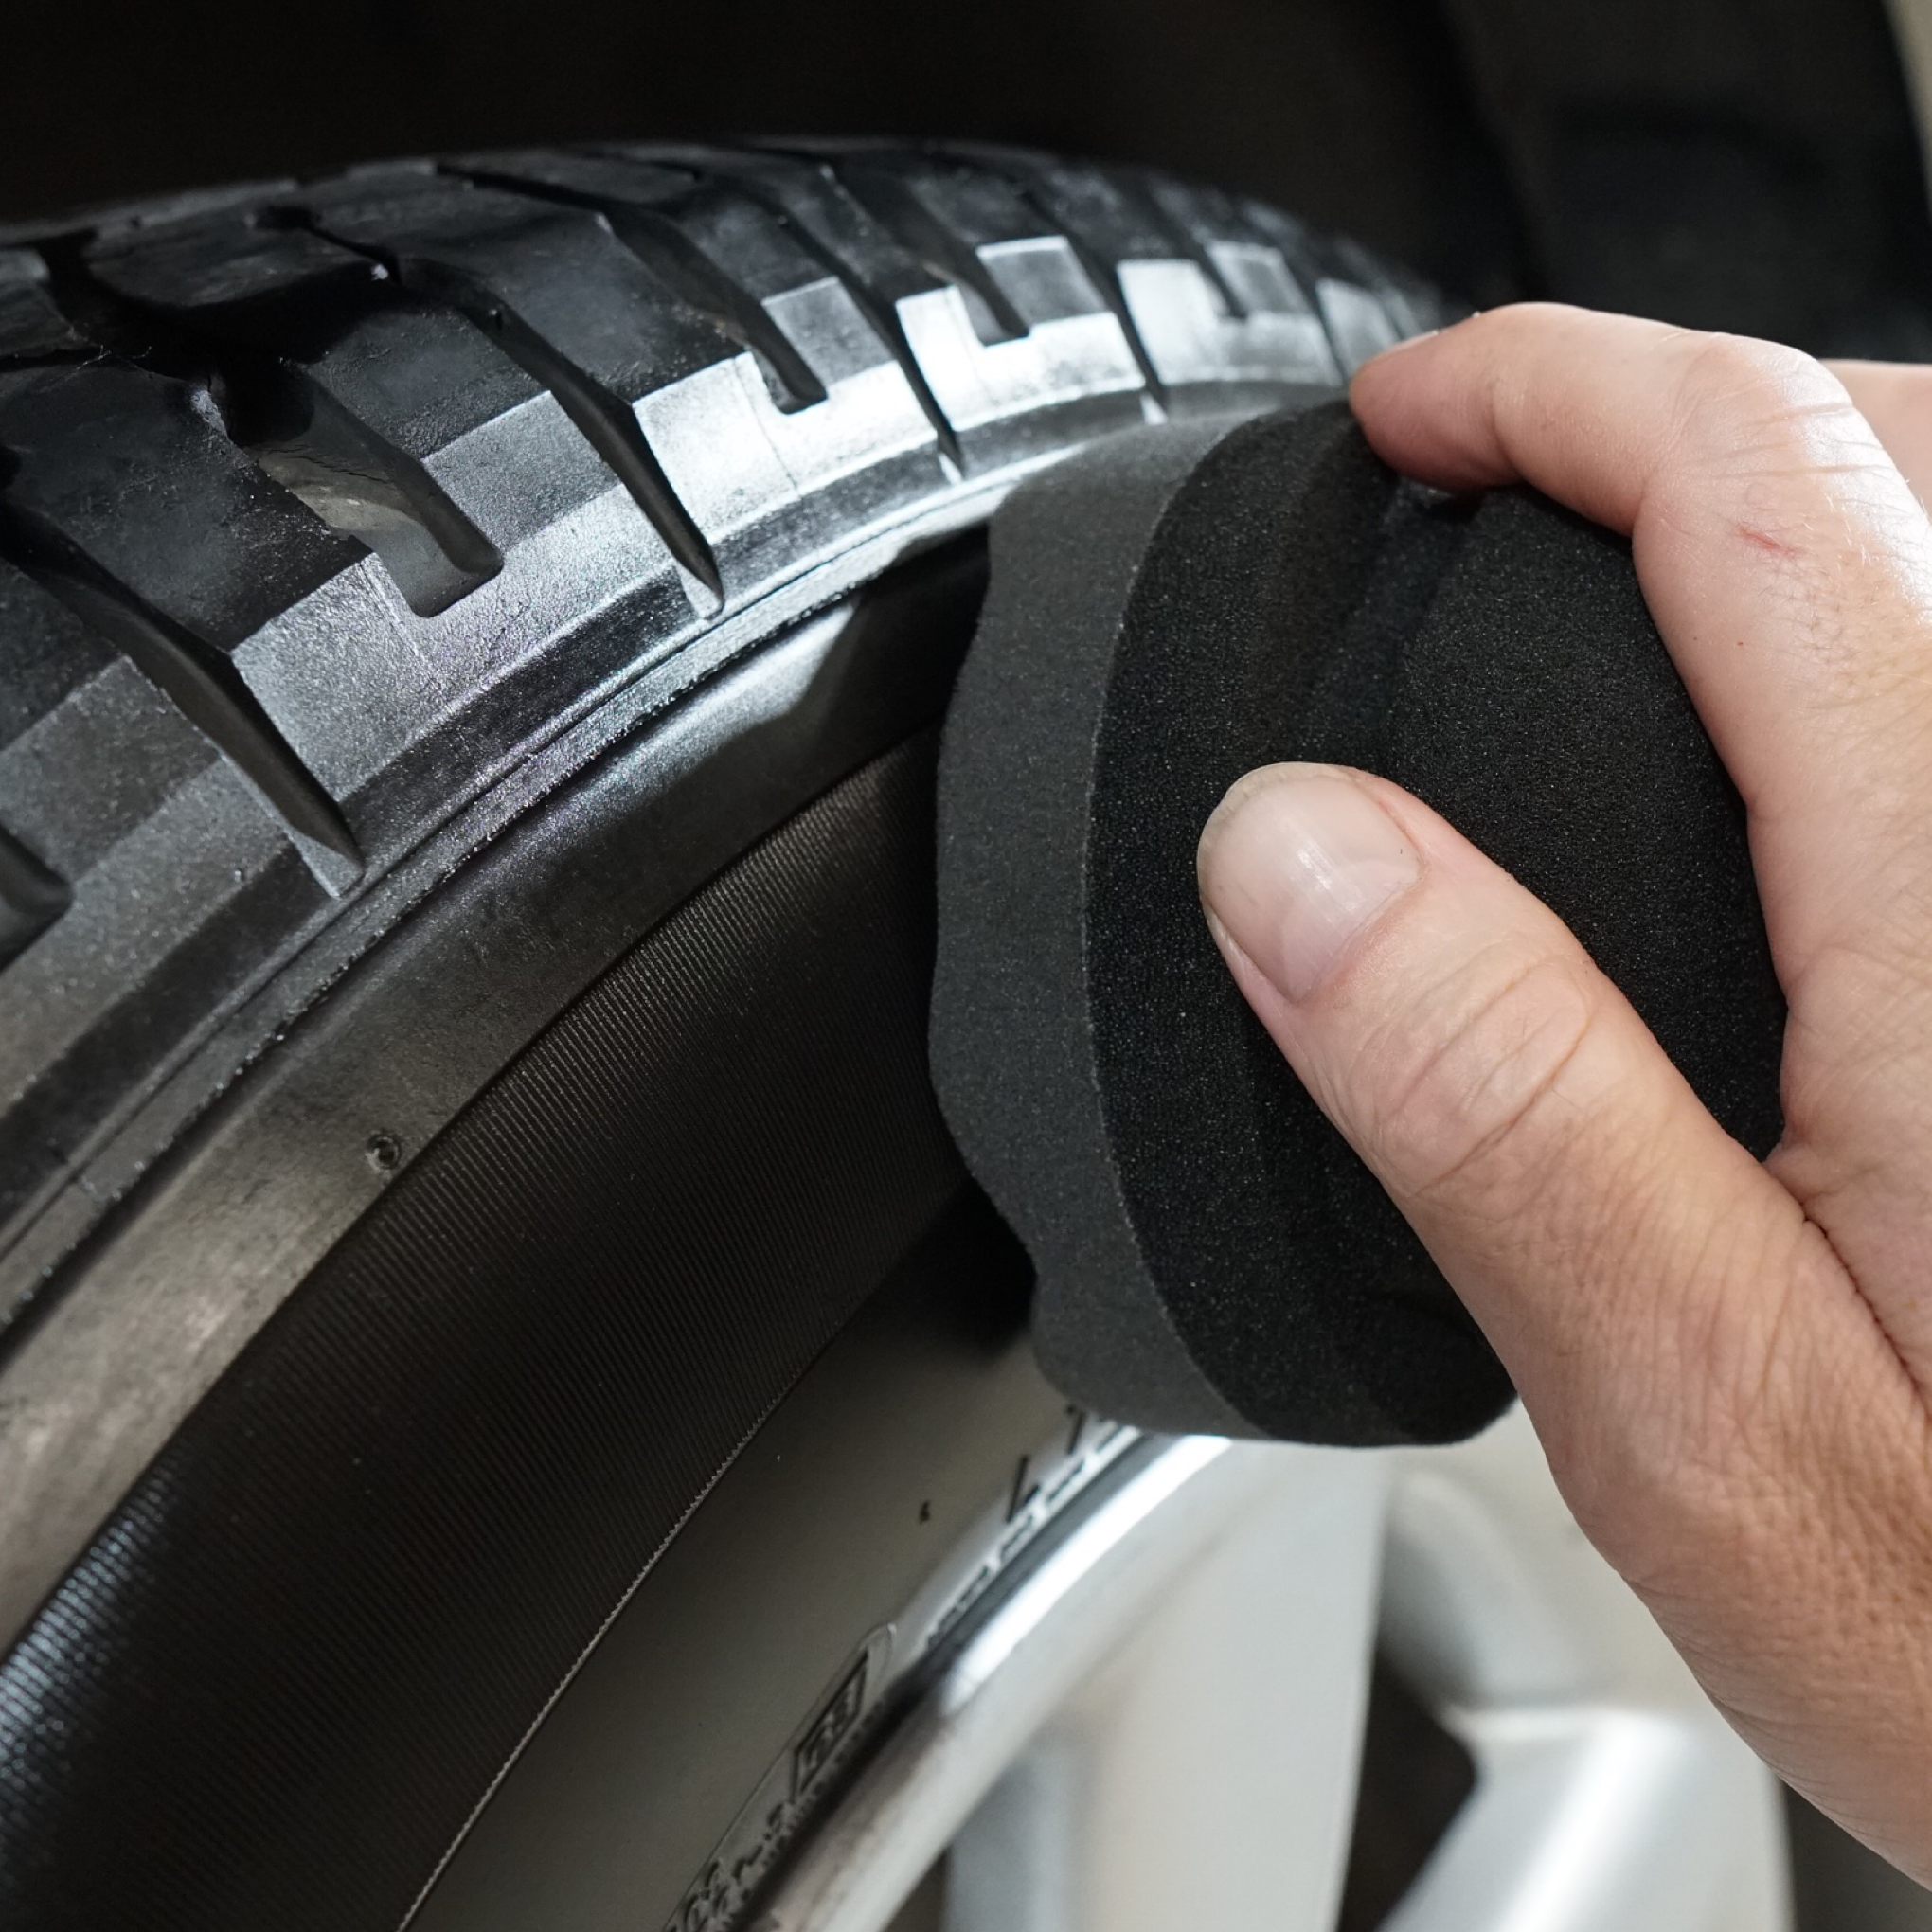 Is this the best tire dressing applicator? 